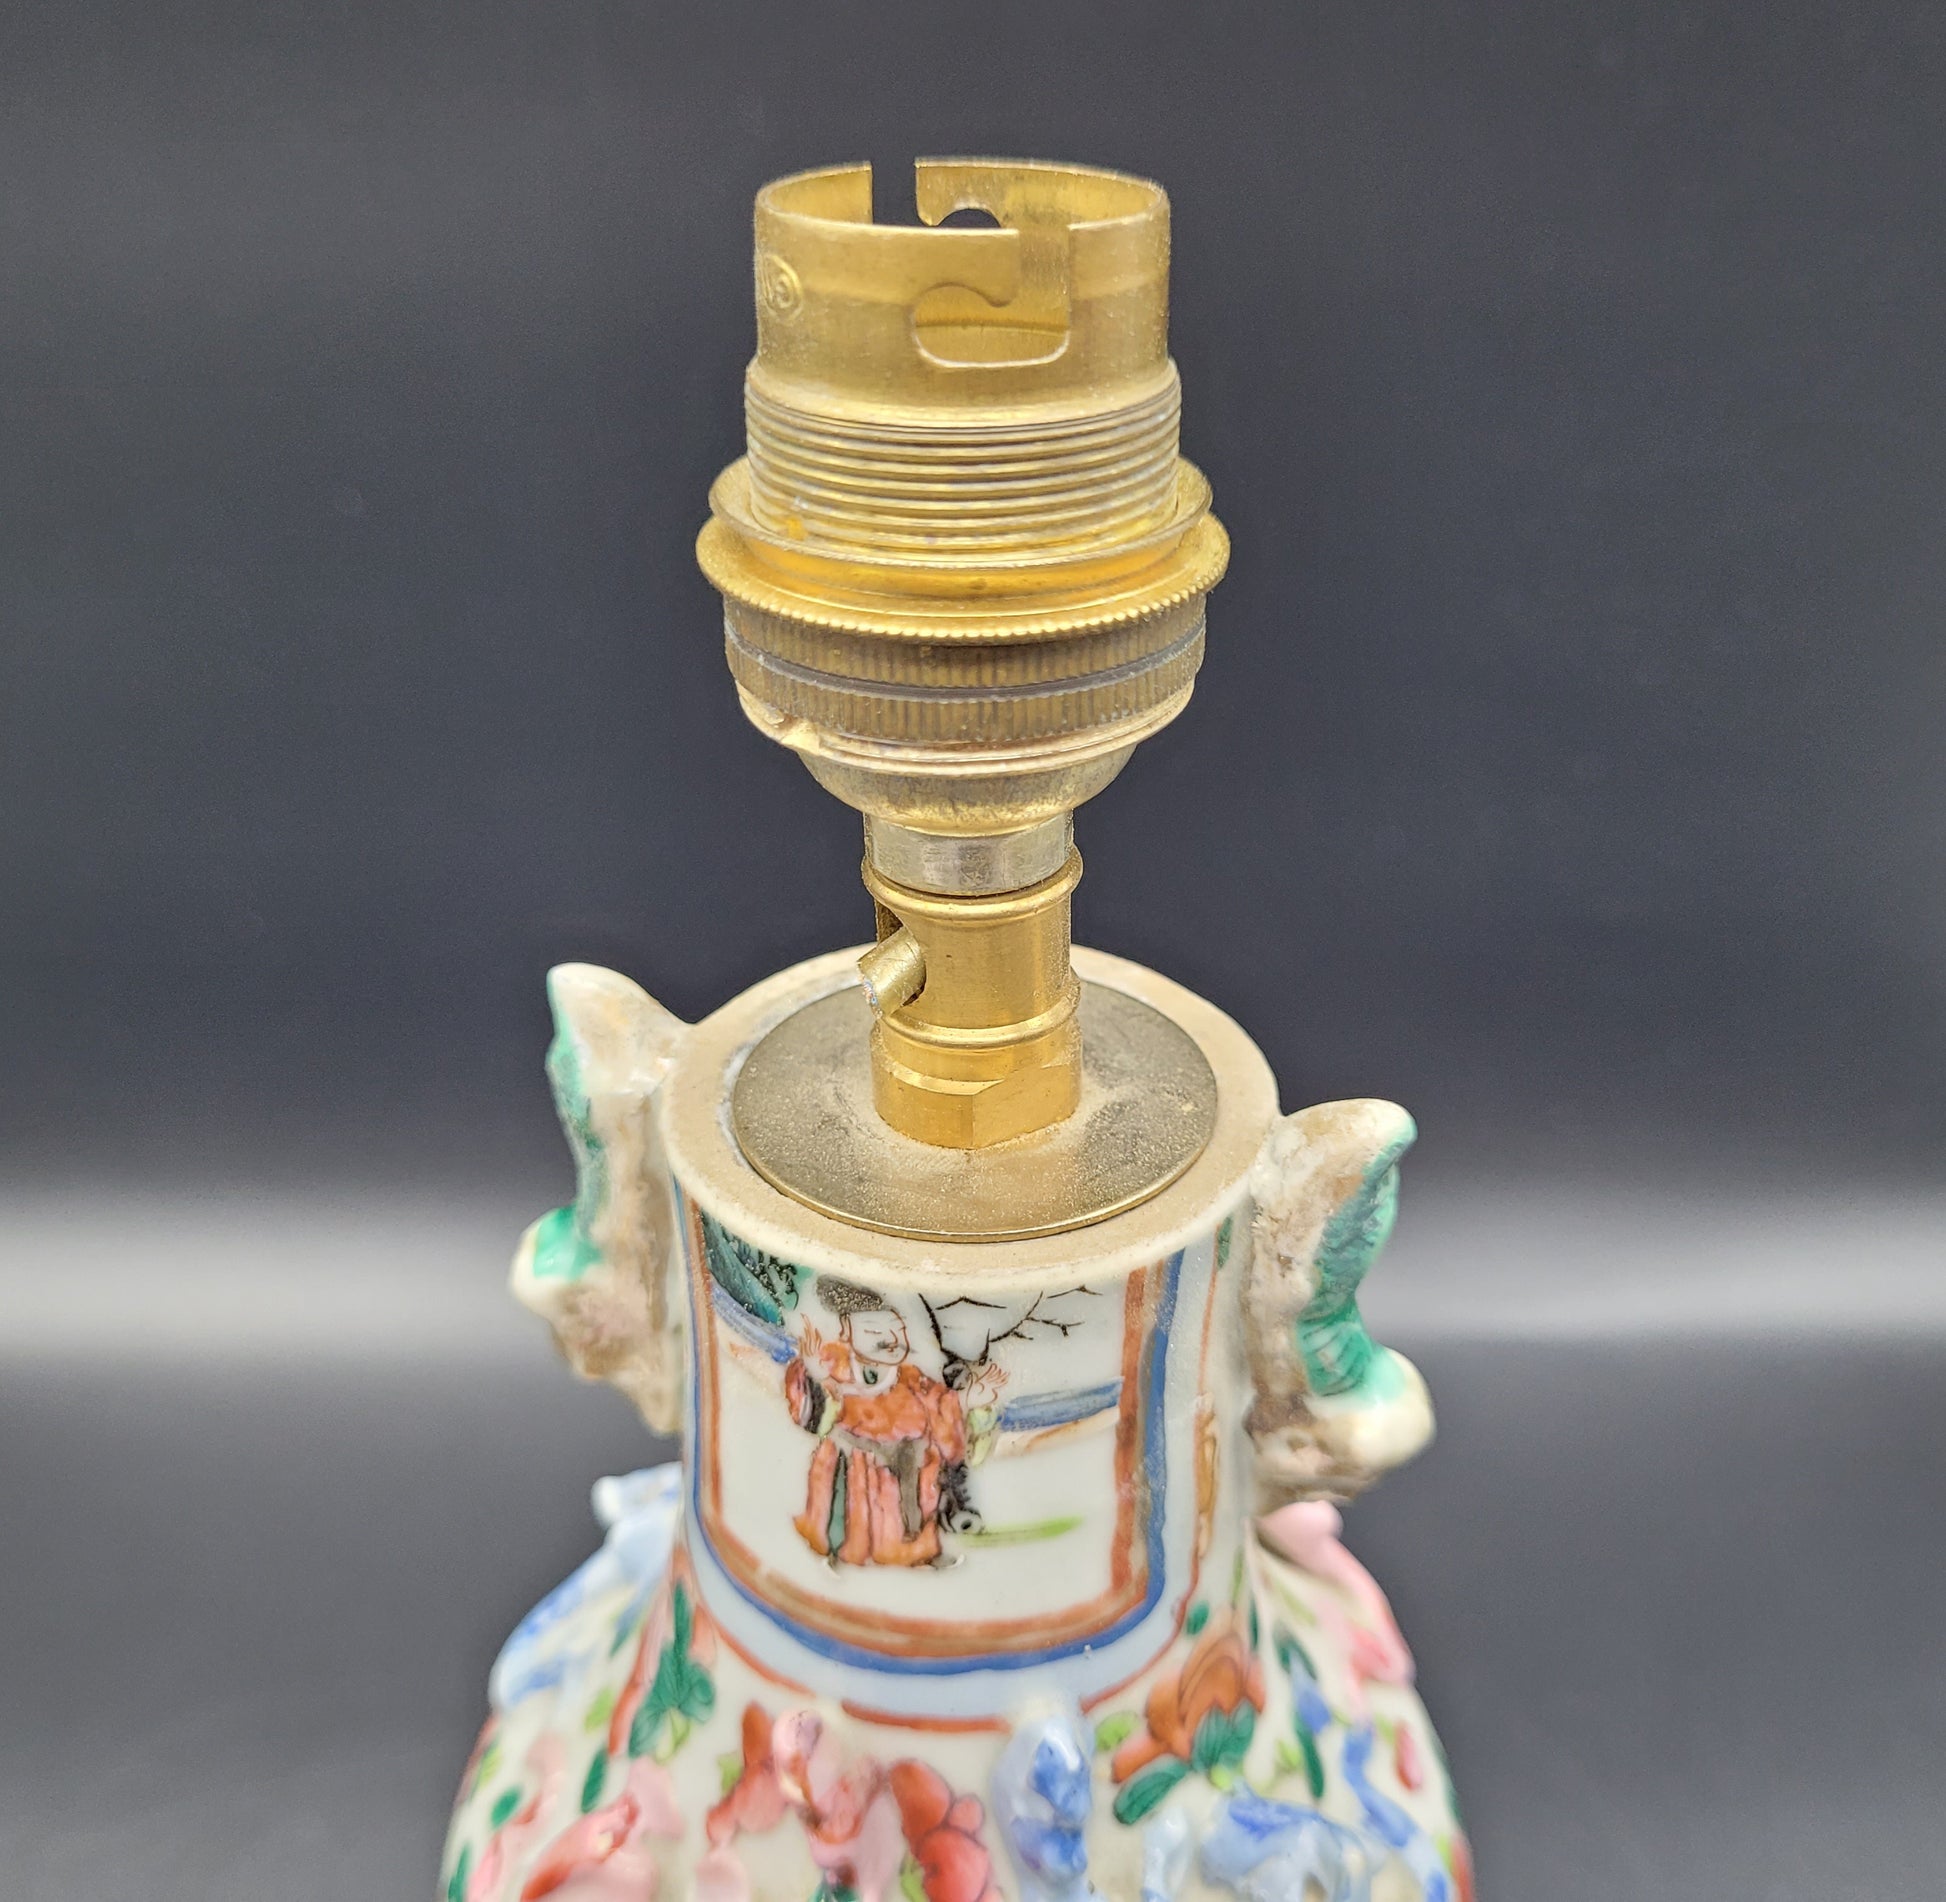 Christies auction Chinese Antique Qing Vase 19th Century Table Lamp